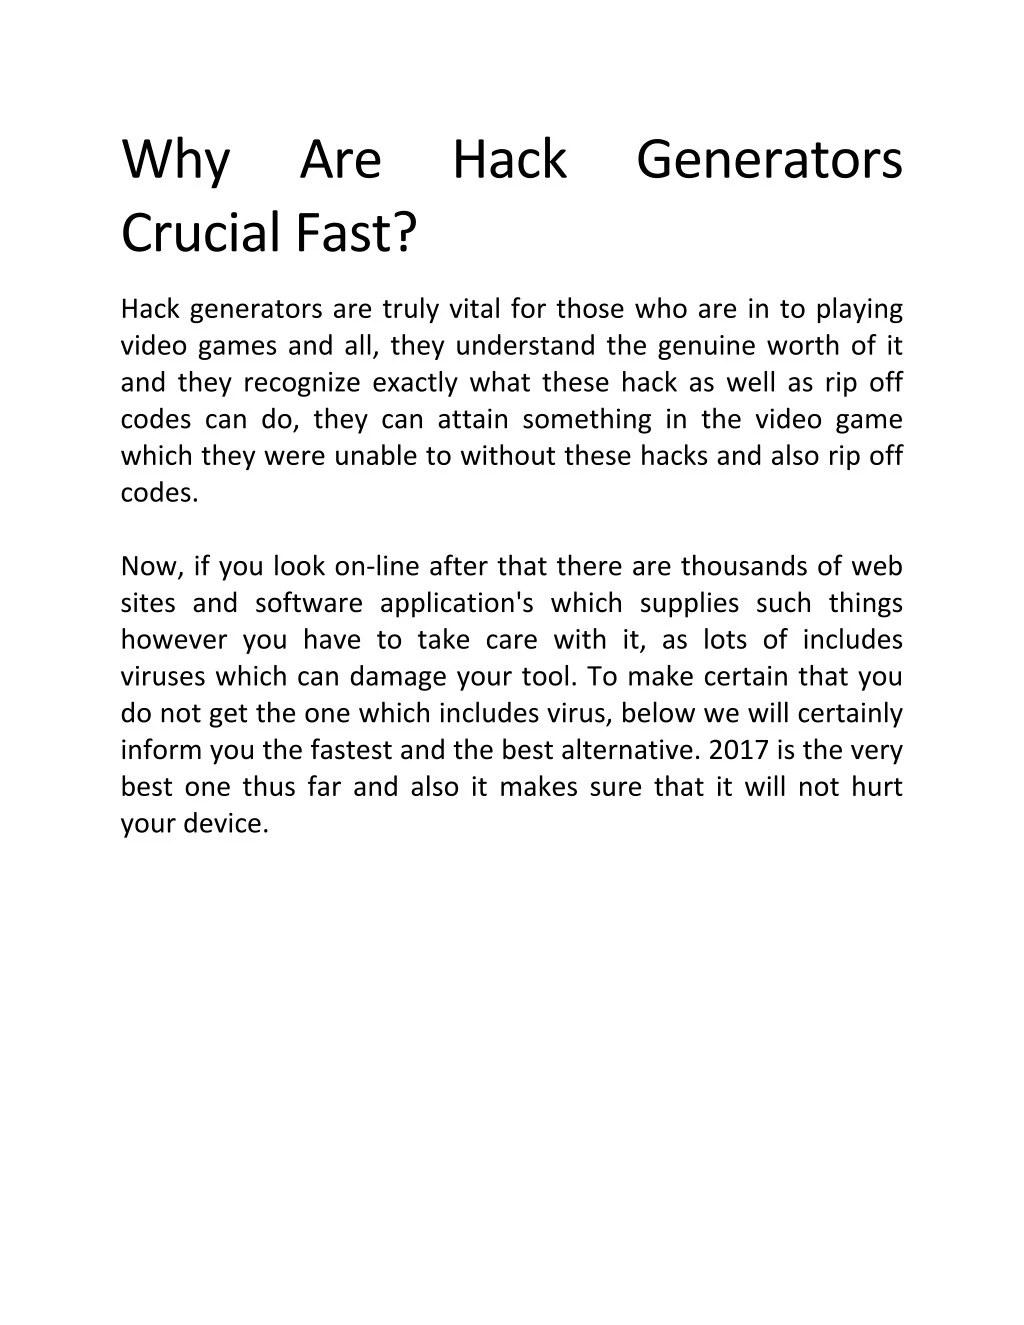 why crucial fast